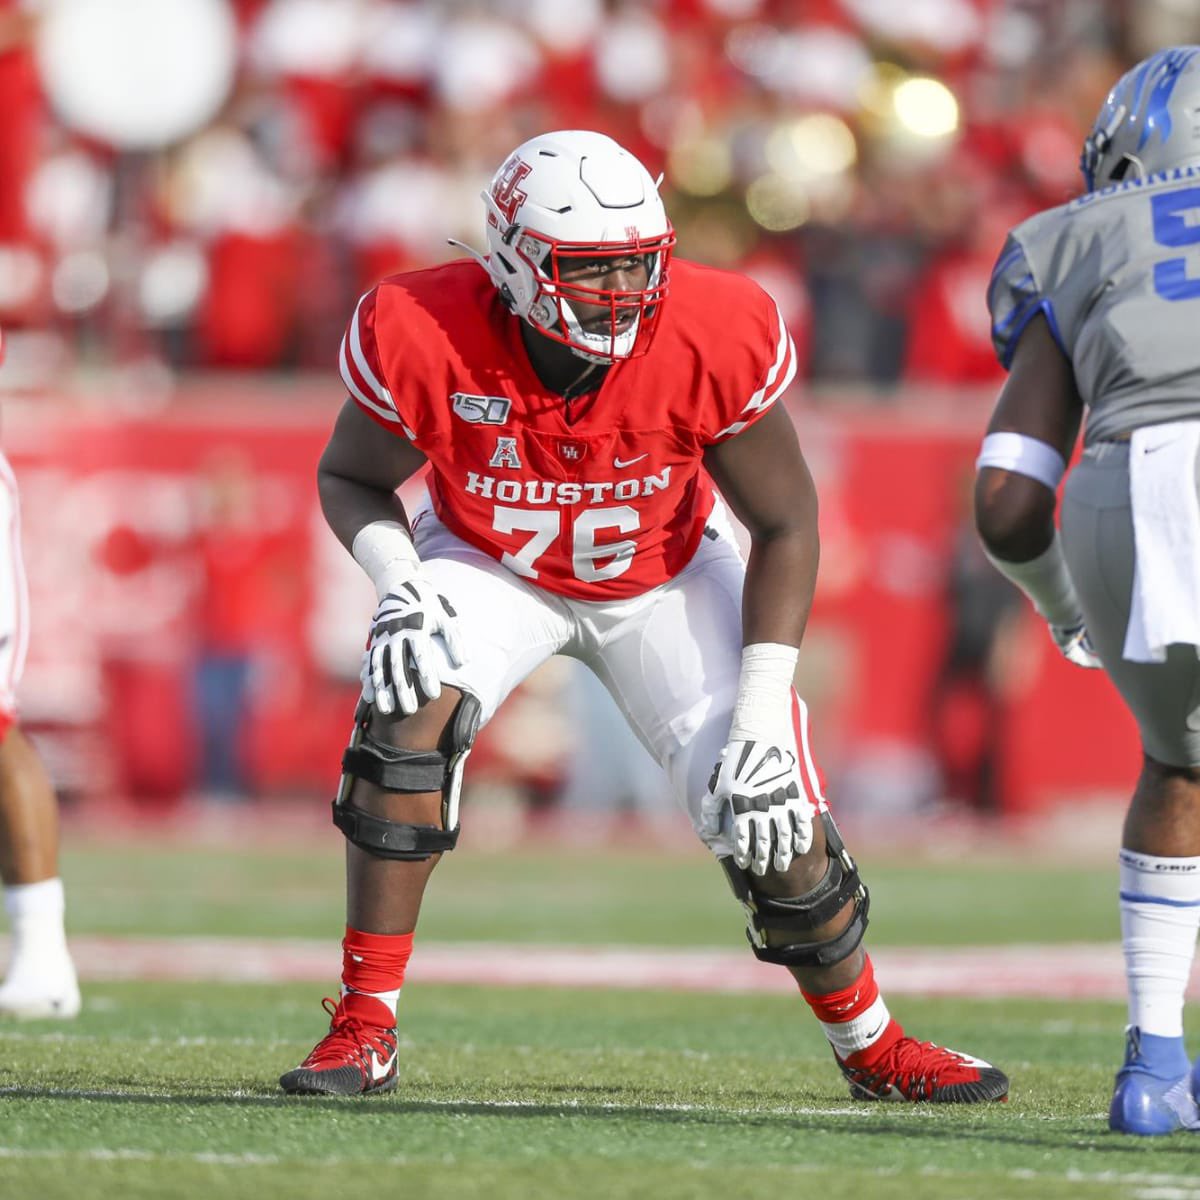 Sources to @_MLFootball: Houston standout tackle Patrick Paul had TOP-30 visits with the Buffalo #Bills and New York #Jets. Patrick is 6-foot-7, 331 pounds. He met with 11 teams and is very capable of playing both tackle positions.